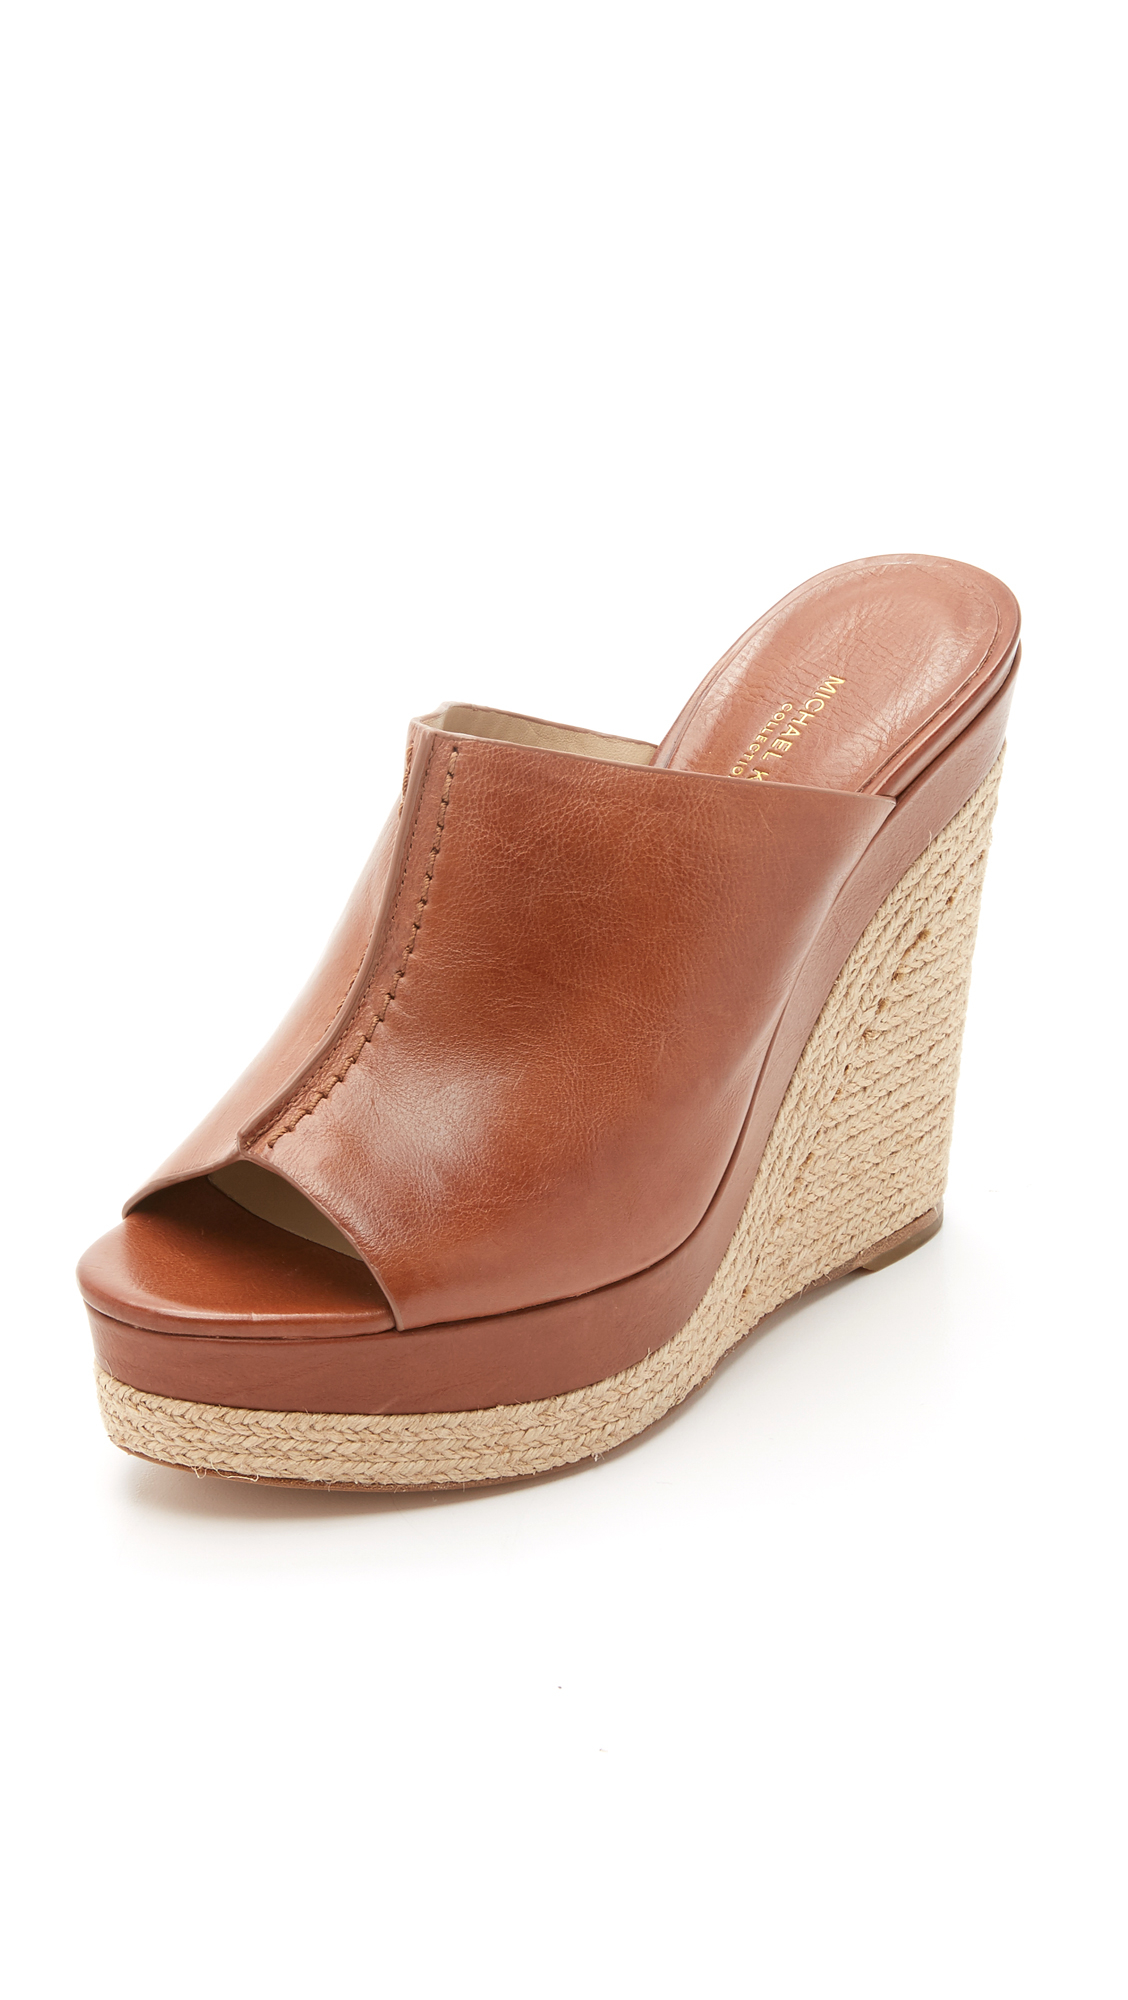 Michael Kors Charlize Wedge Mules in Brown | Lyst